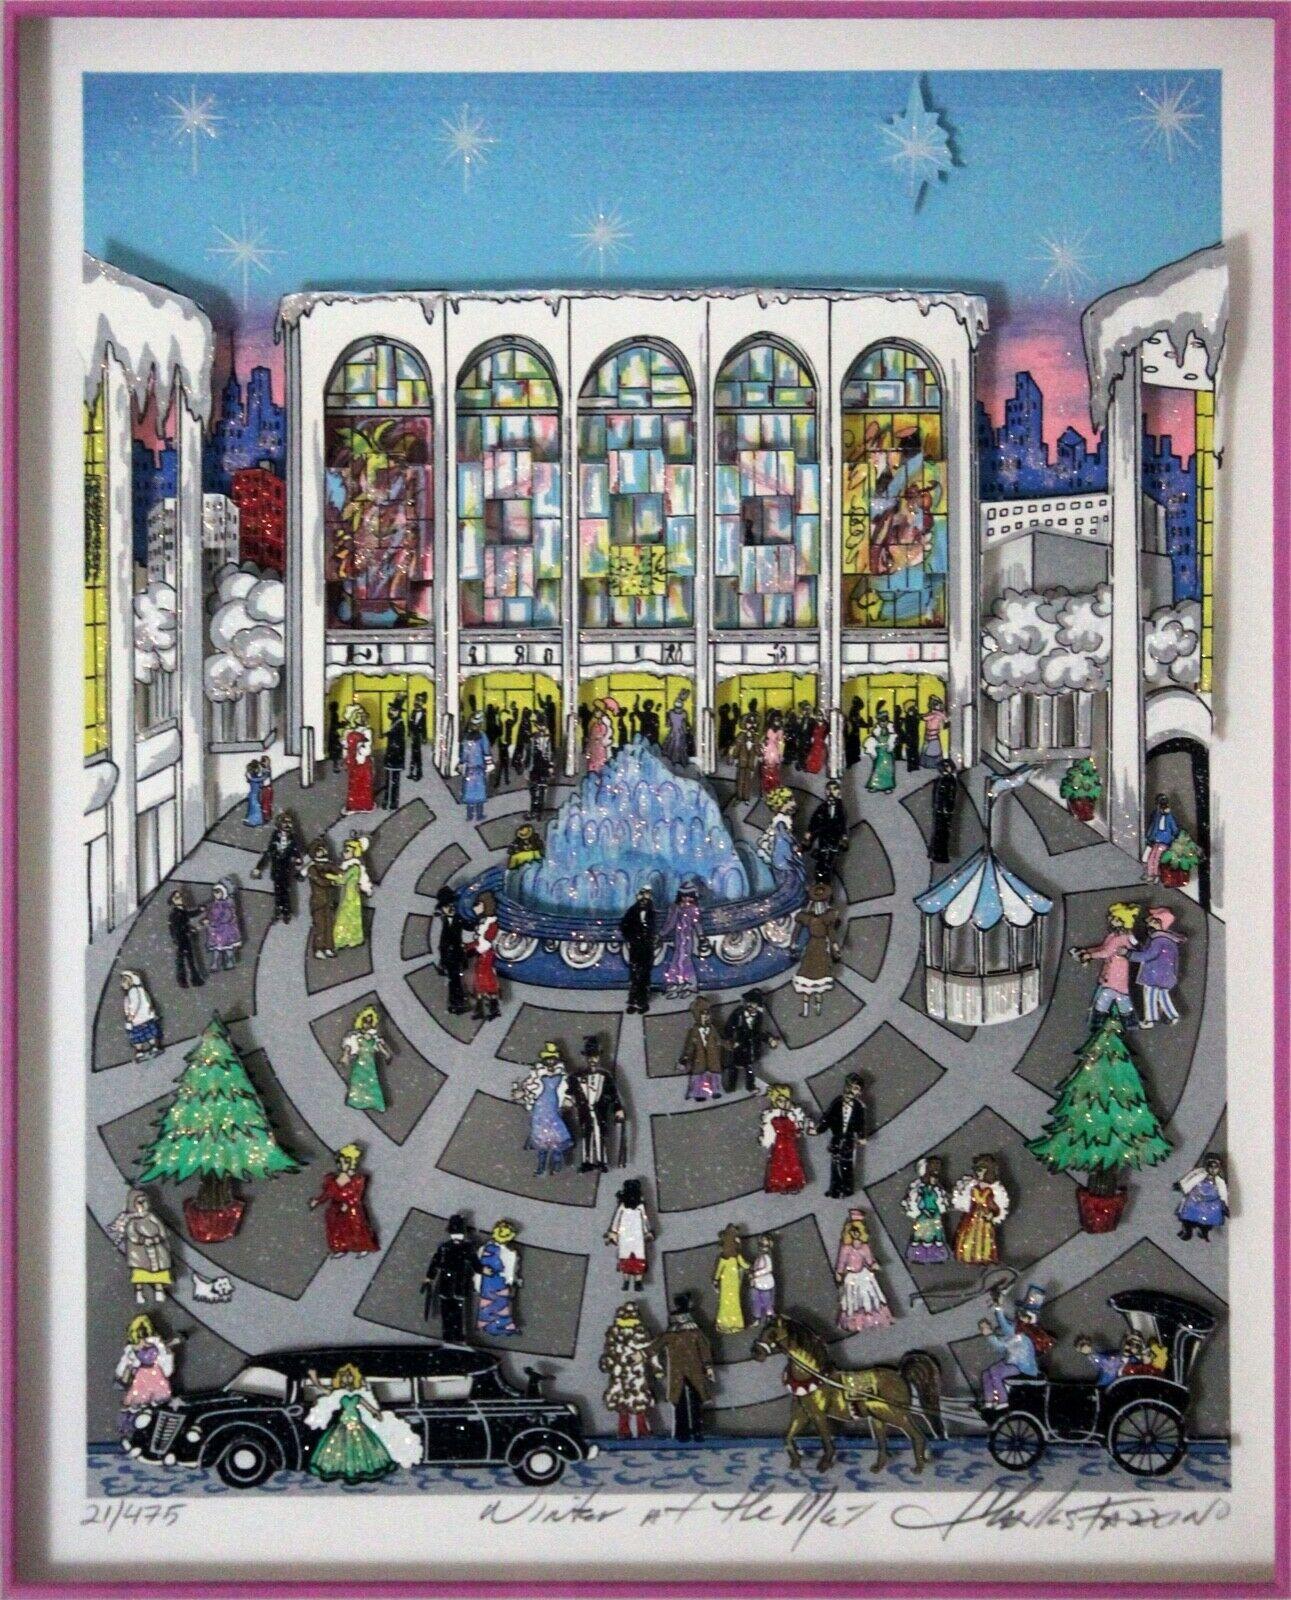 Le Shoppe Too in Michigan is offering a fabulous 3D serigraph titled Winter at The MET by Charles Fazzino. Signed in pencil on the bottom right with an annotation of 21/475. A glamorous view into one of the most beloved art museums in NYC!